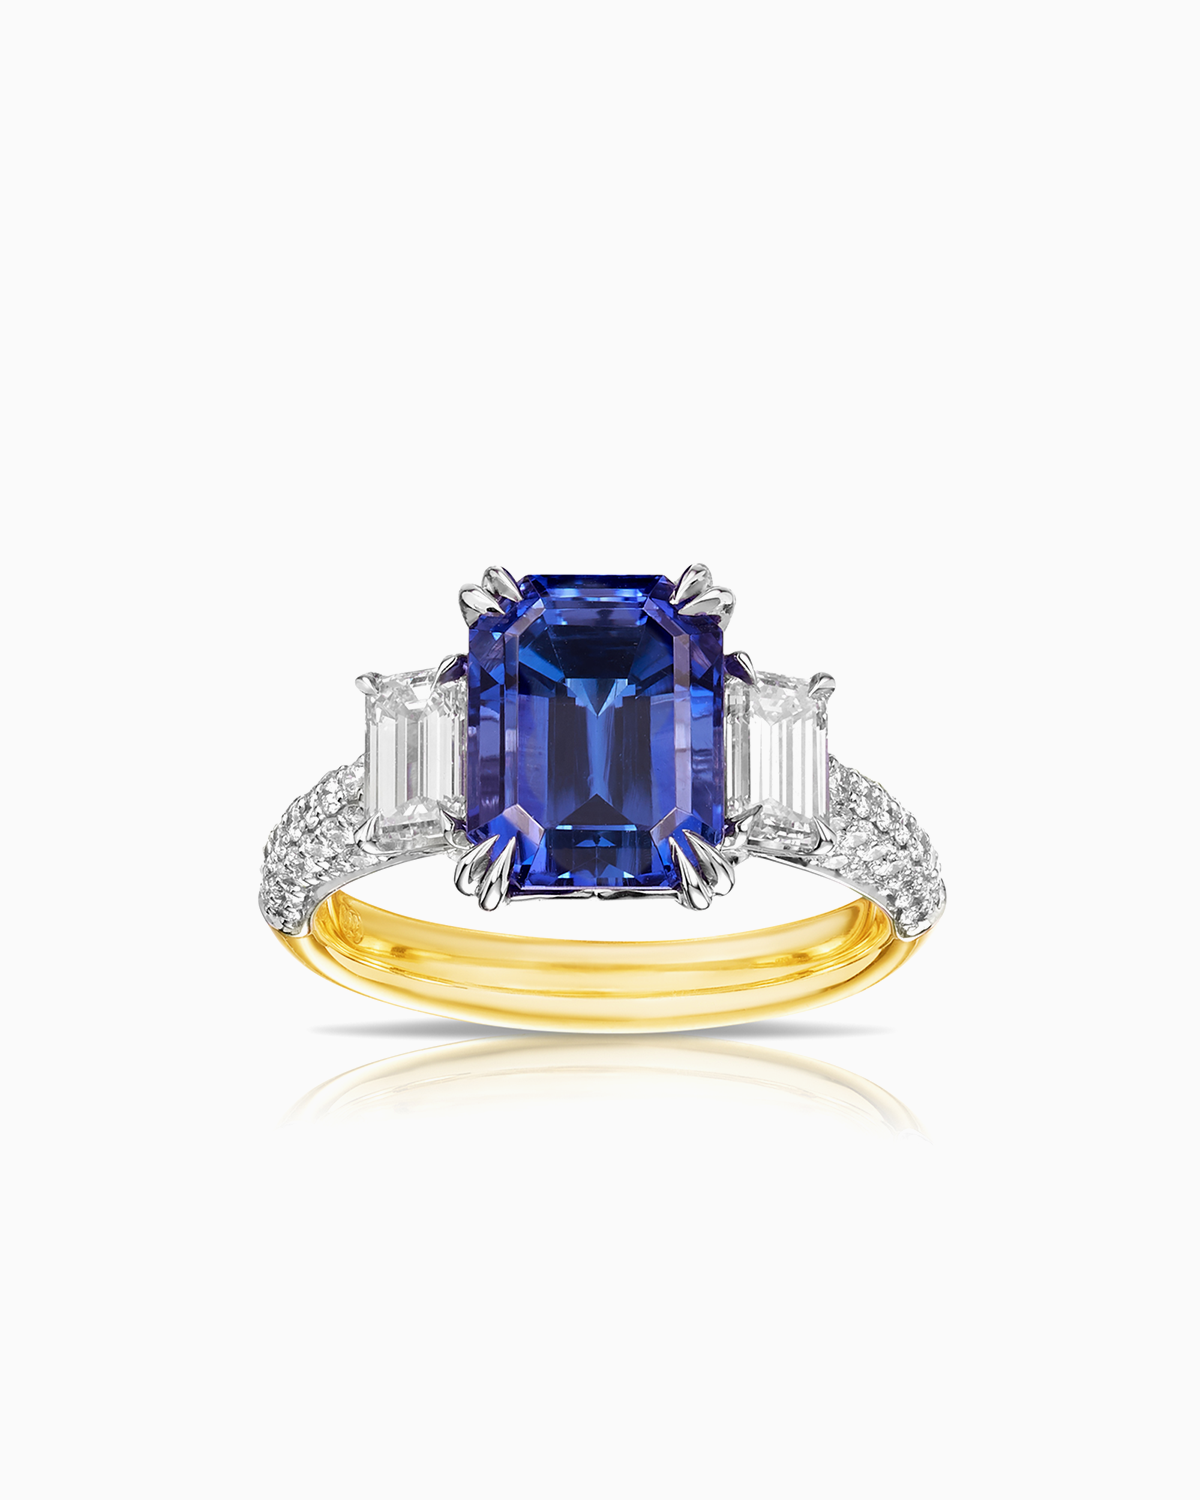 3.78ct tanzanite and diamond trilogy with pave set diamond shoulders and 18 karat white and yellow gold by claude and me jewellery.